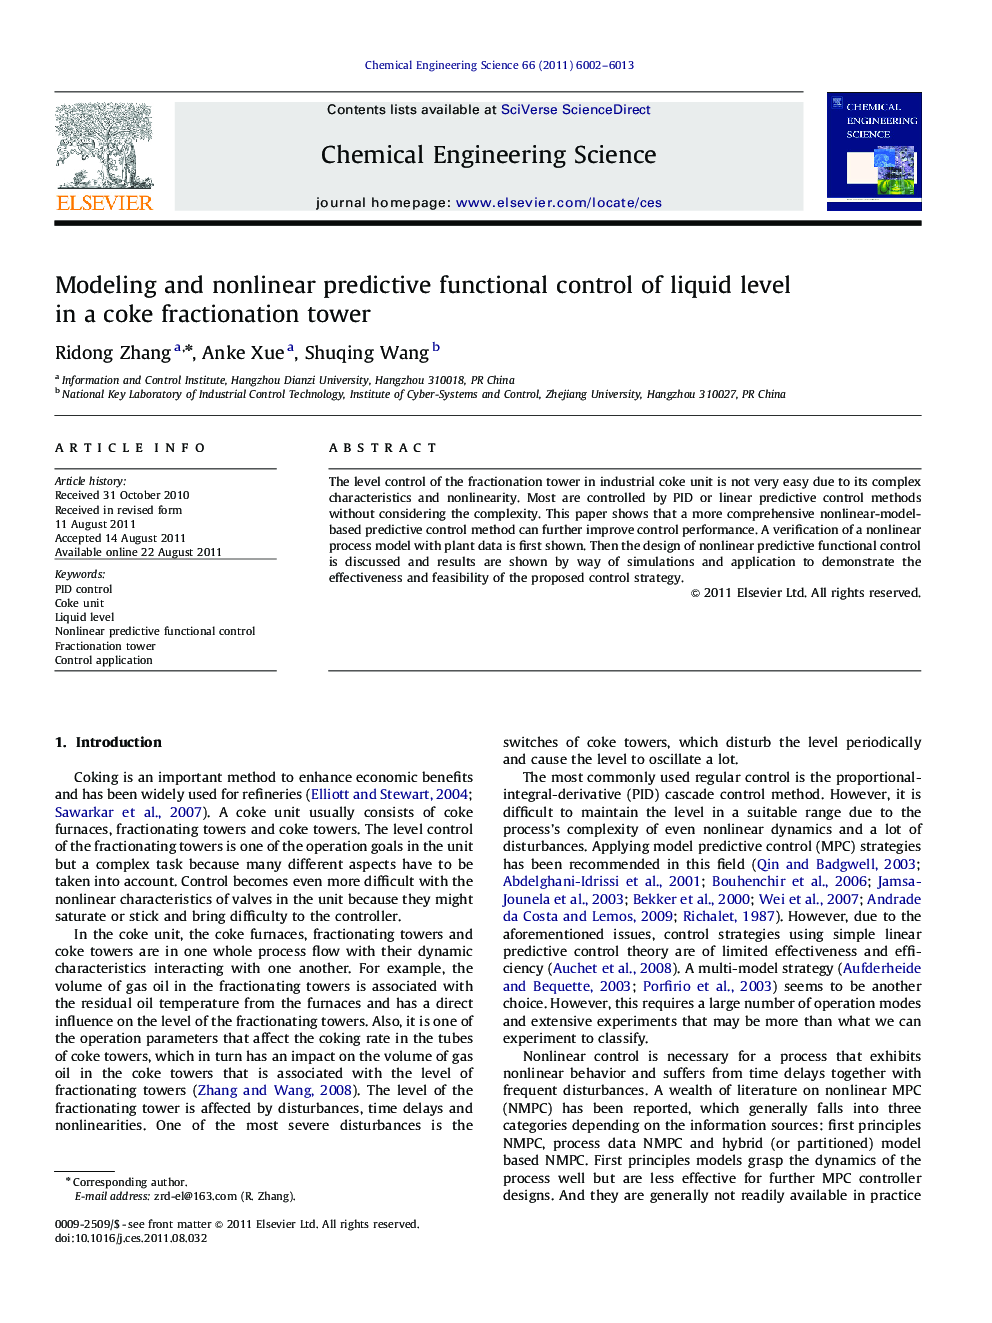 Modeling and nonlinear predictive functional control of liquid level in a coke fractionation tower